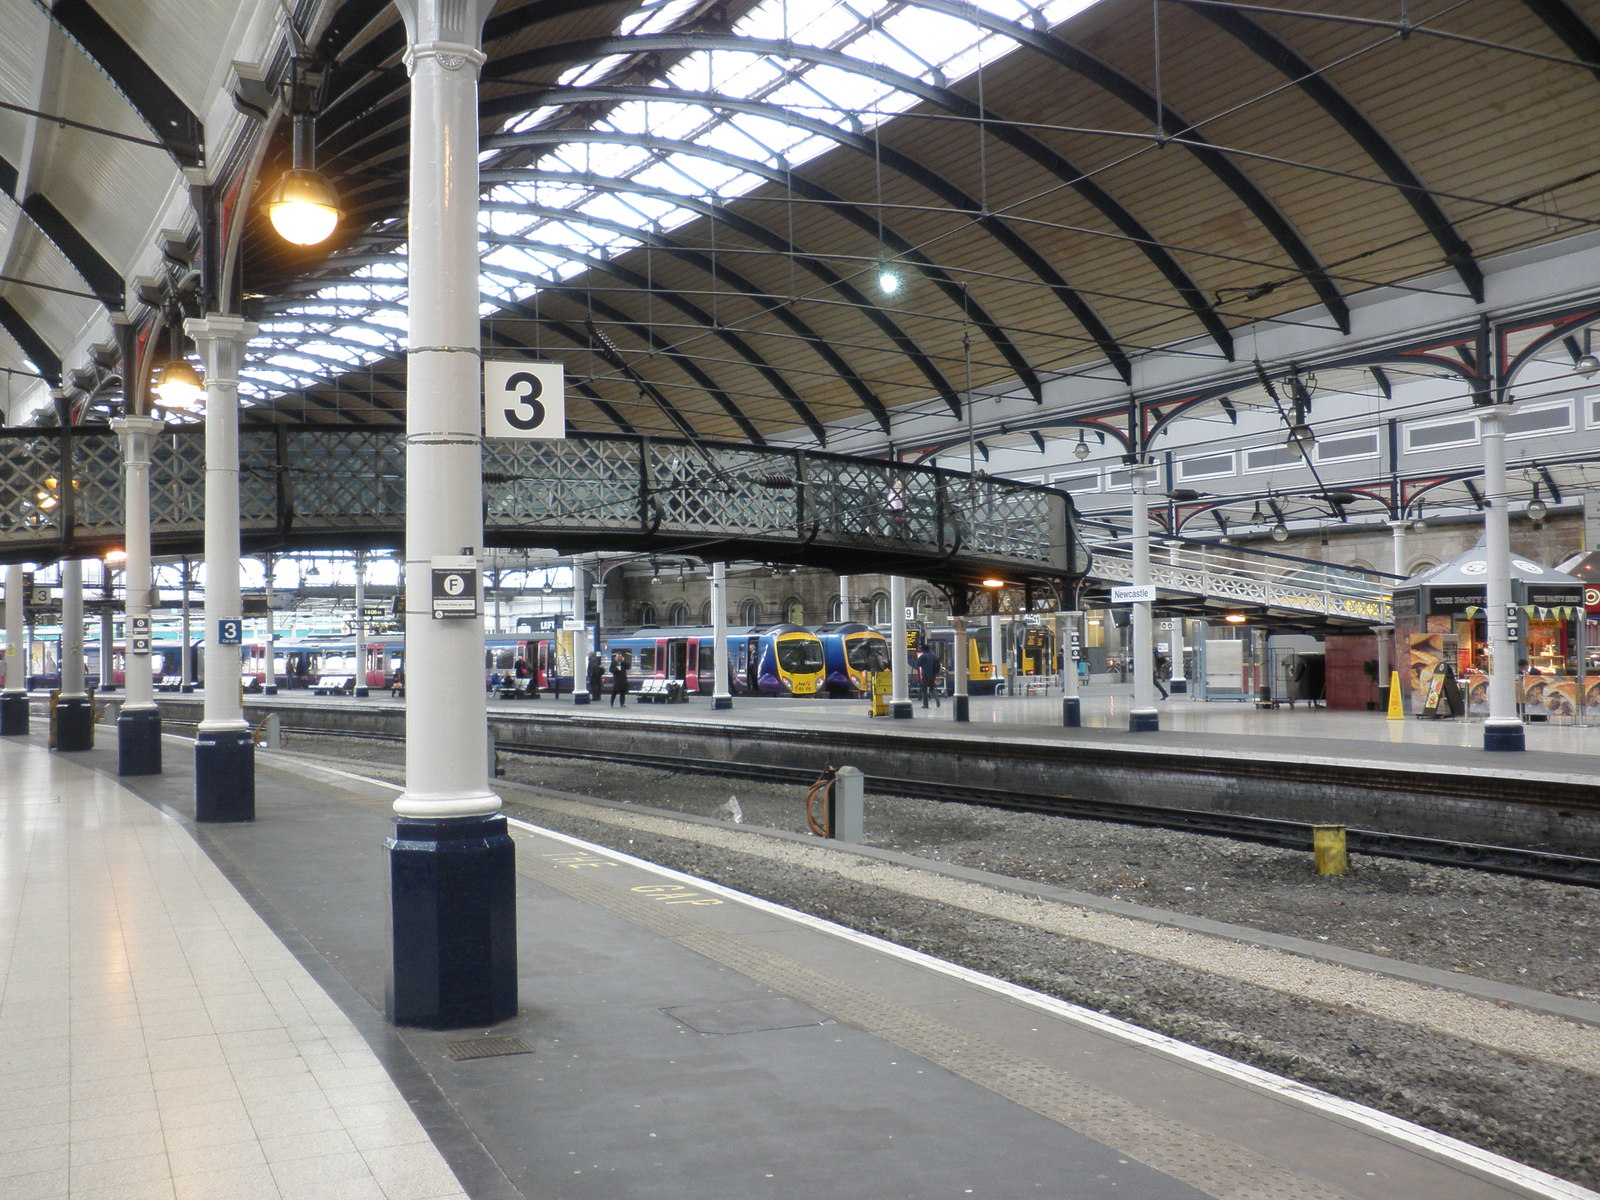 Photograph of Platforms 2 & 3 in Newcastle Central Station